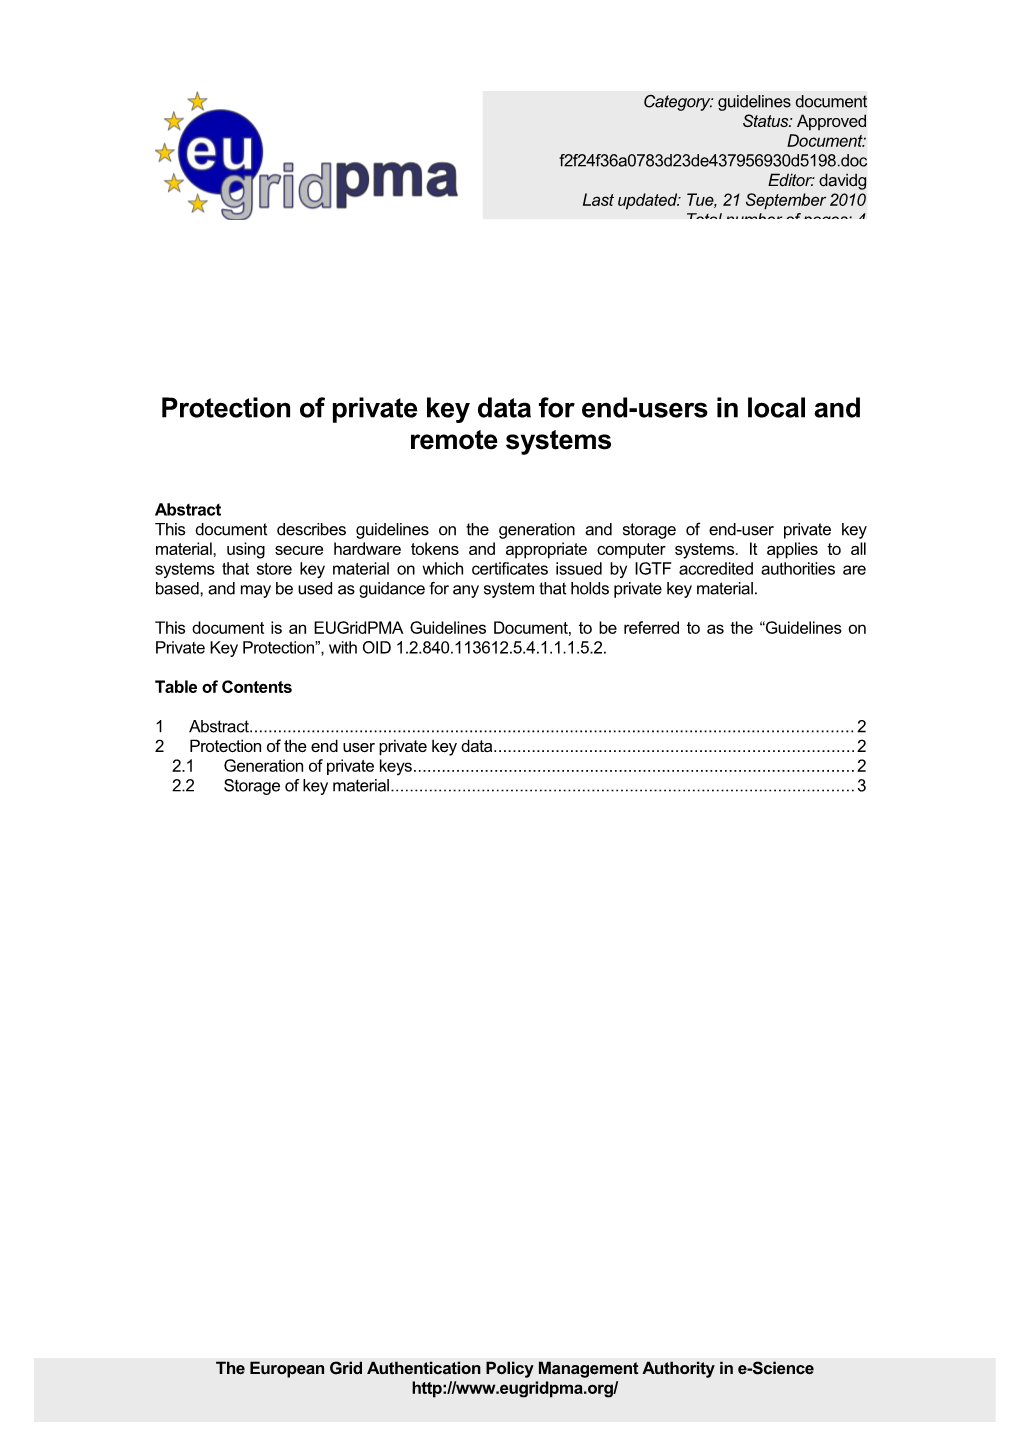 Protection of Private Key Data for End-Users in Local and Remote Systems